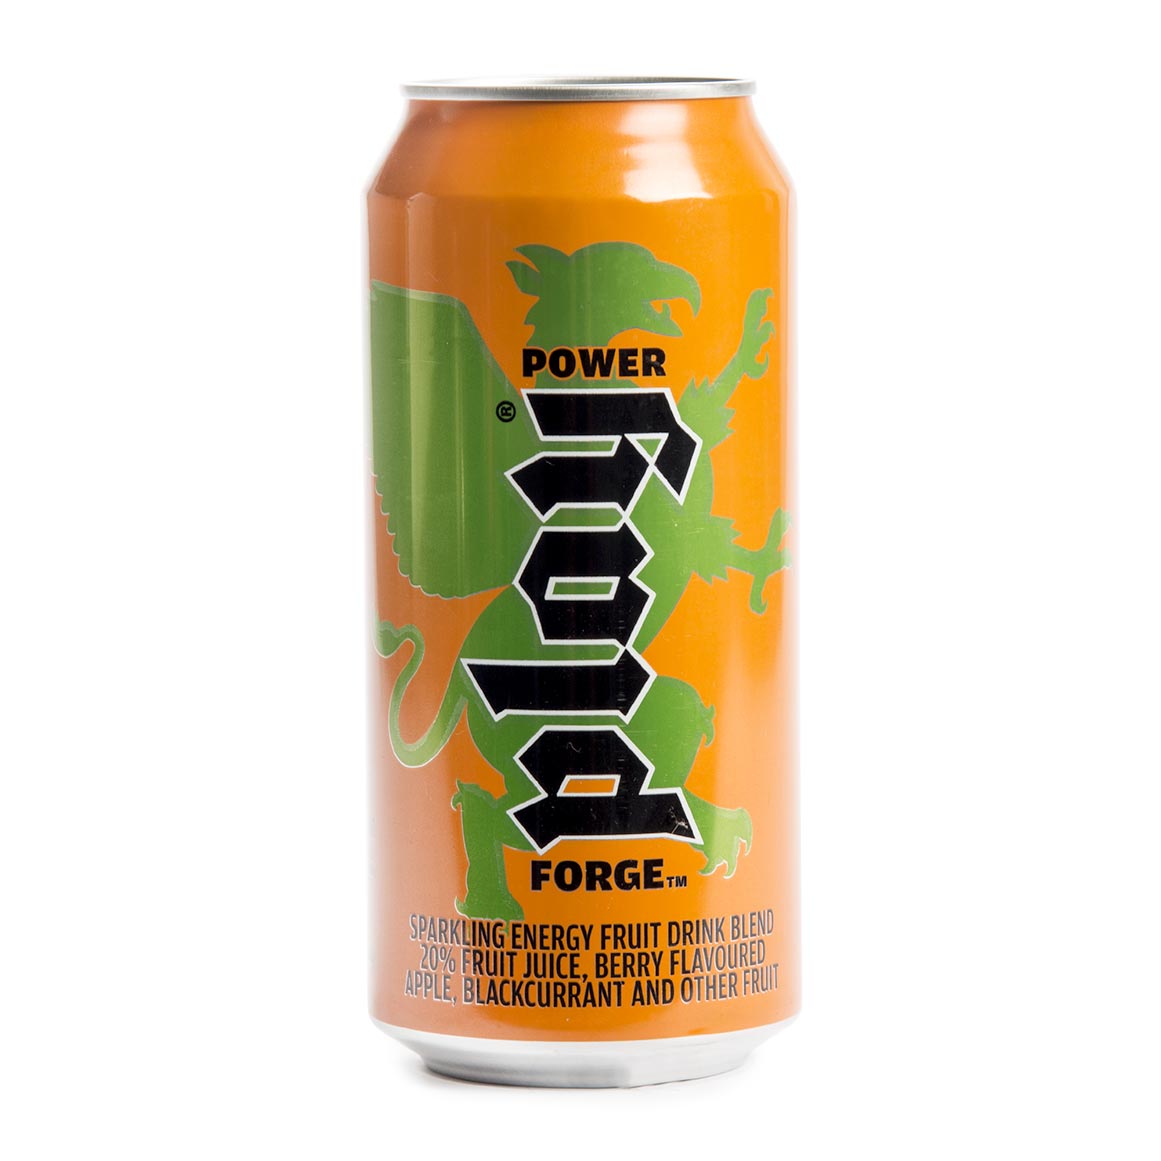 Power Play Forge Sparkling Energy Drink 440 ml | Woolworths.co.za